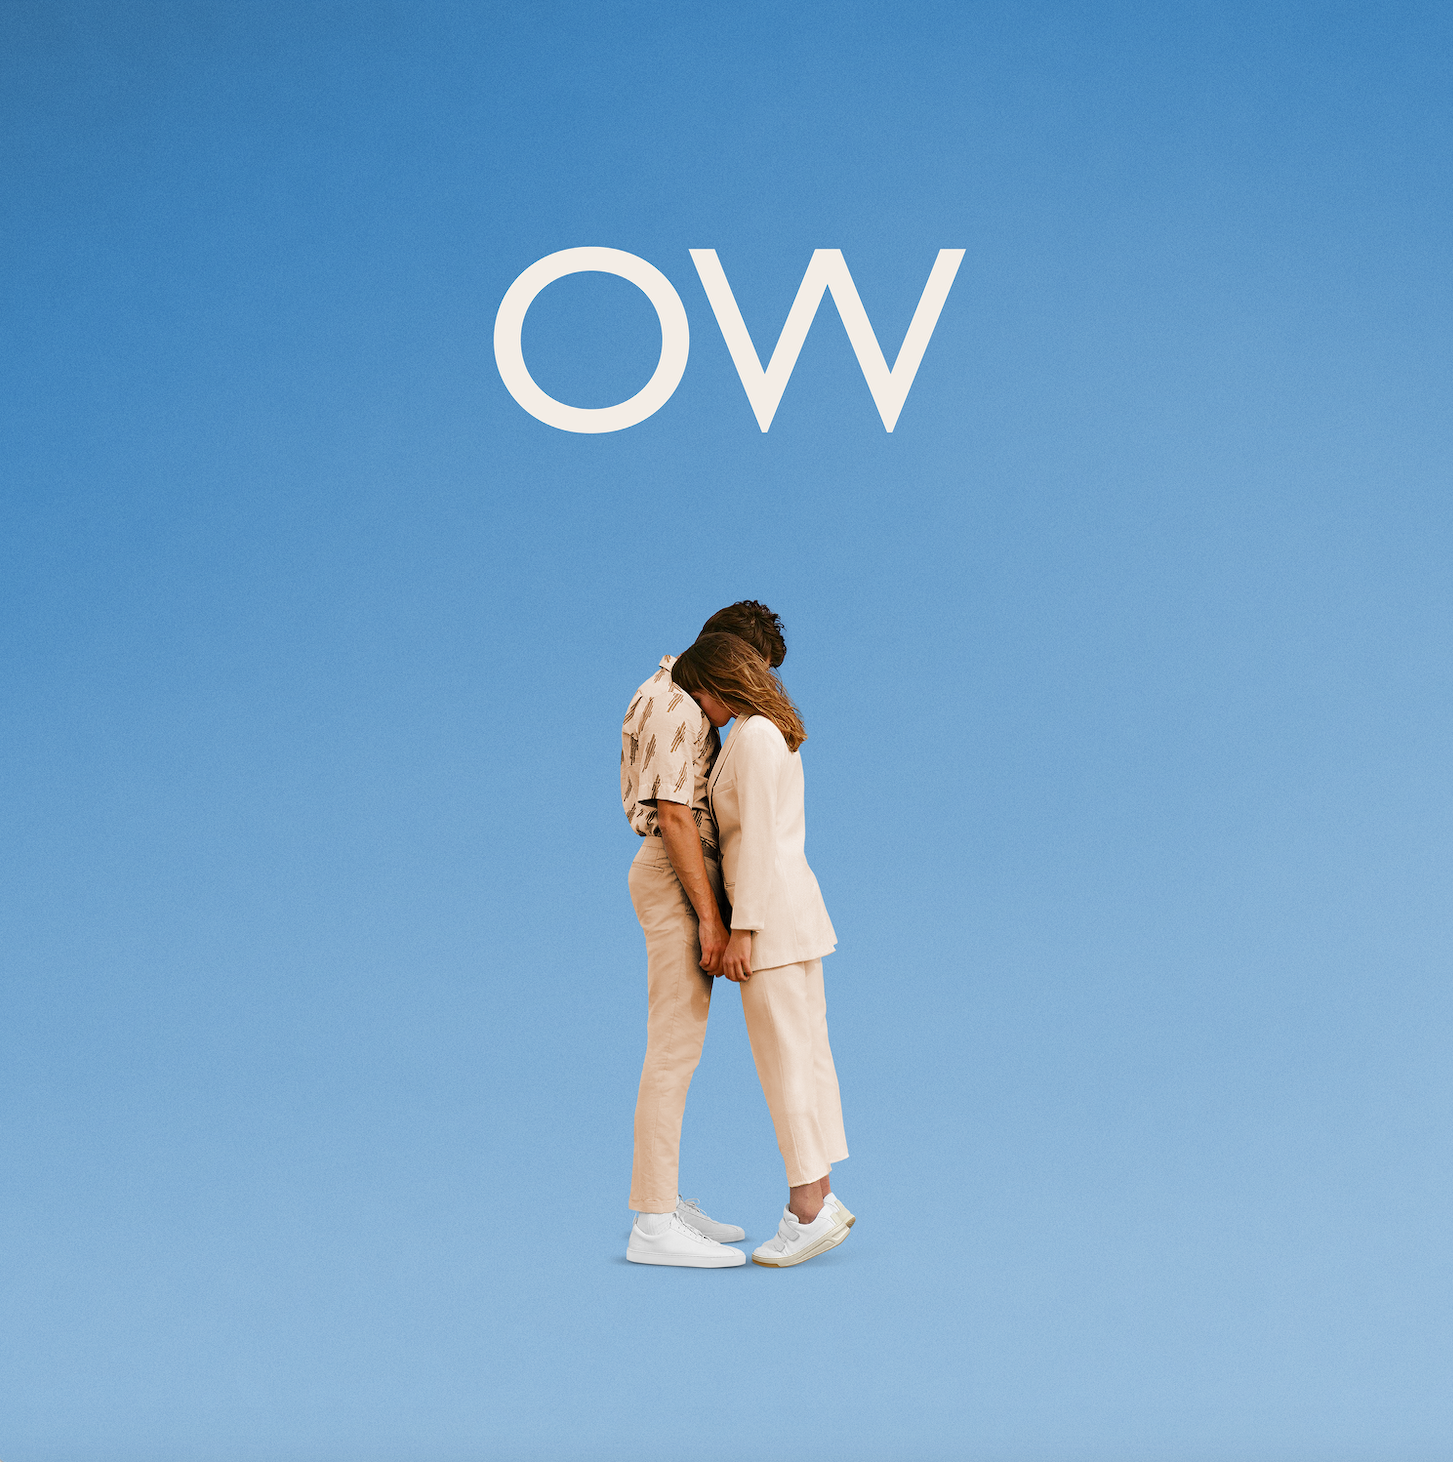 Oh Wonder have shared a new video for their latest single, “I Wish I Never Met You.”